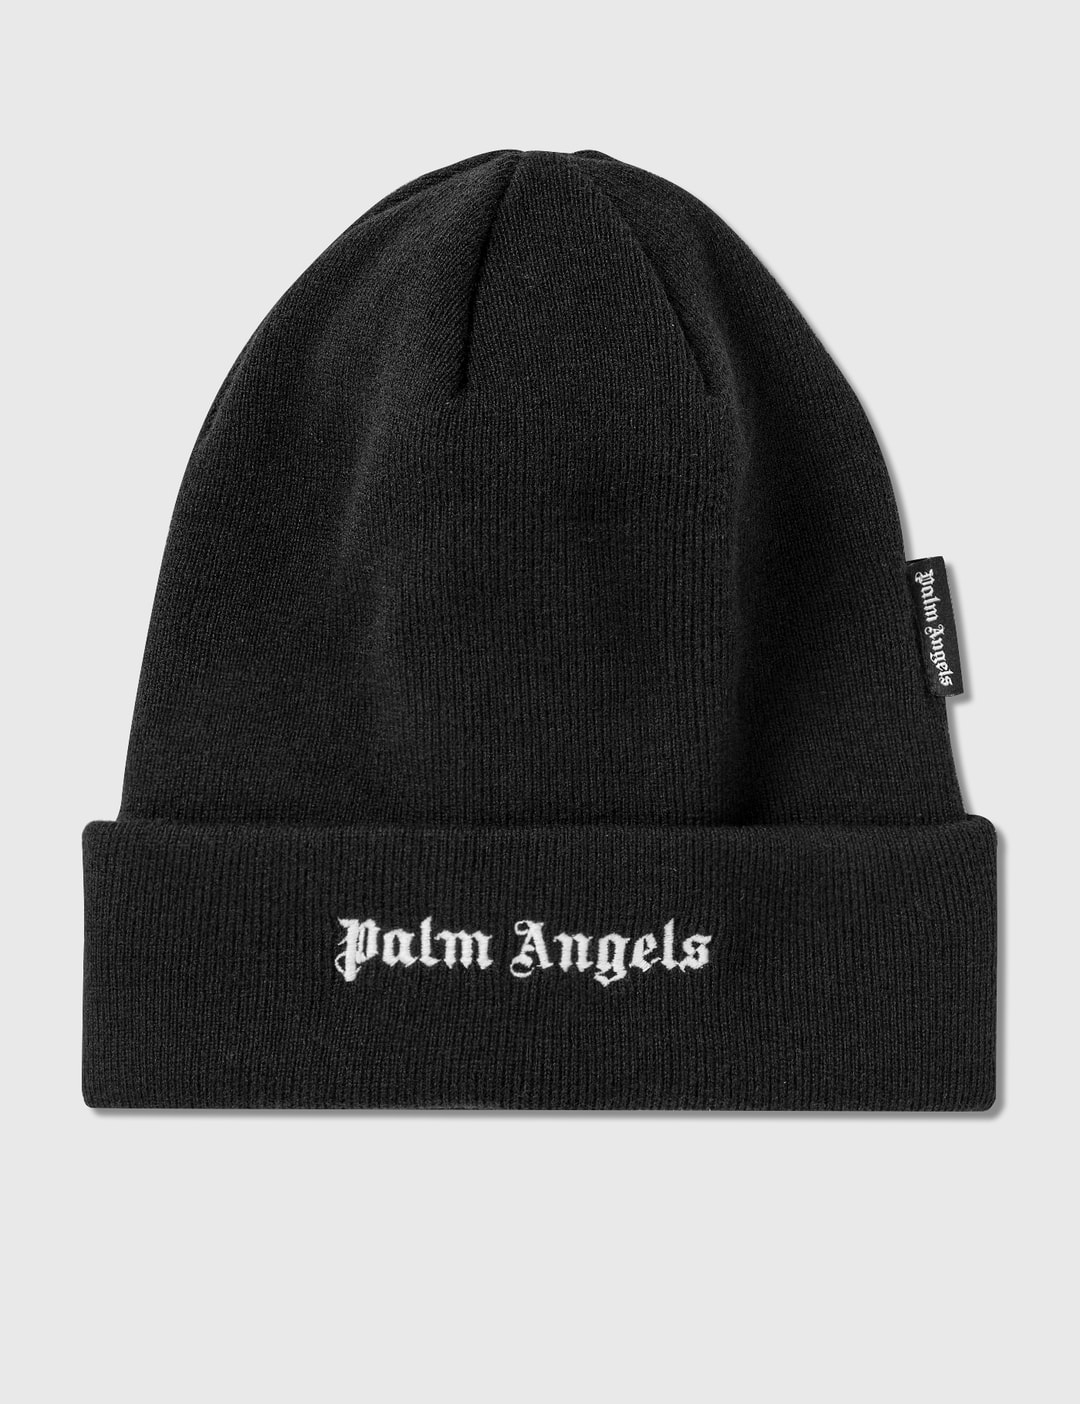 Palm Angels - Logo Beanie | HBX - Globally Curated Fashion and ...